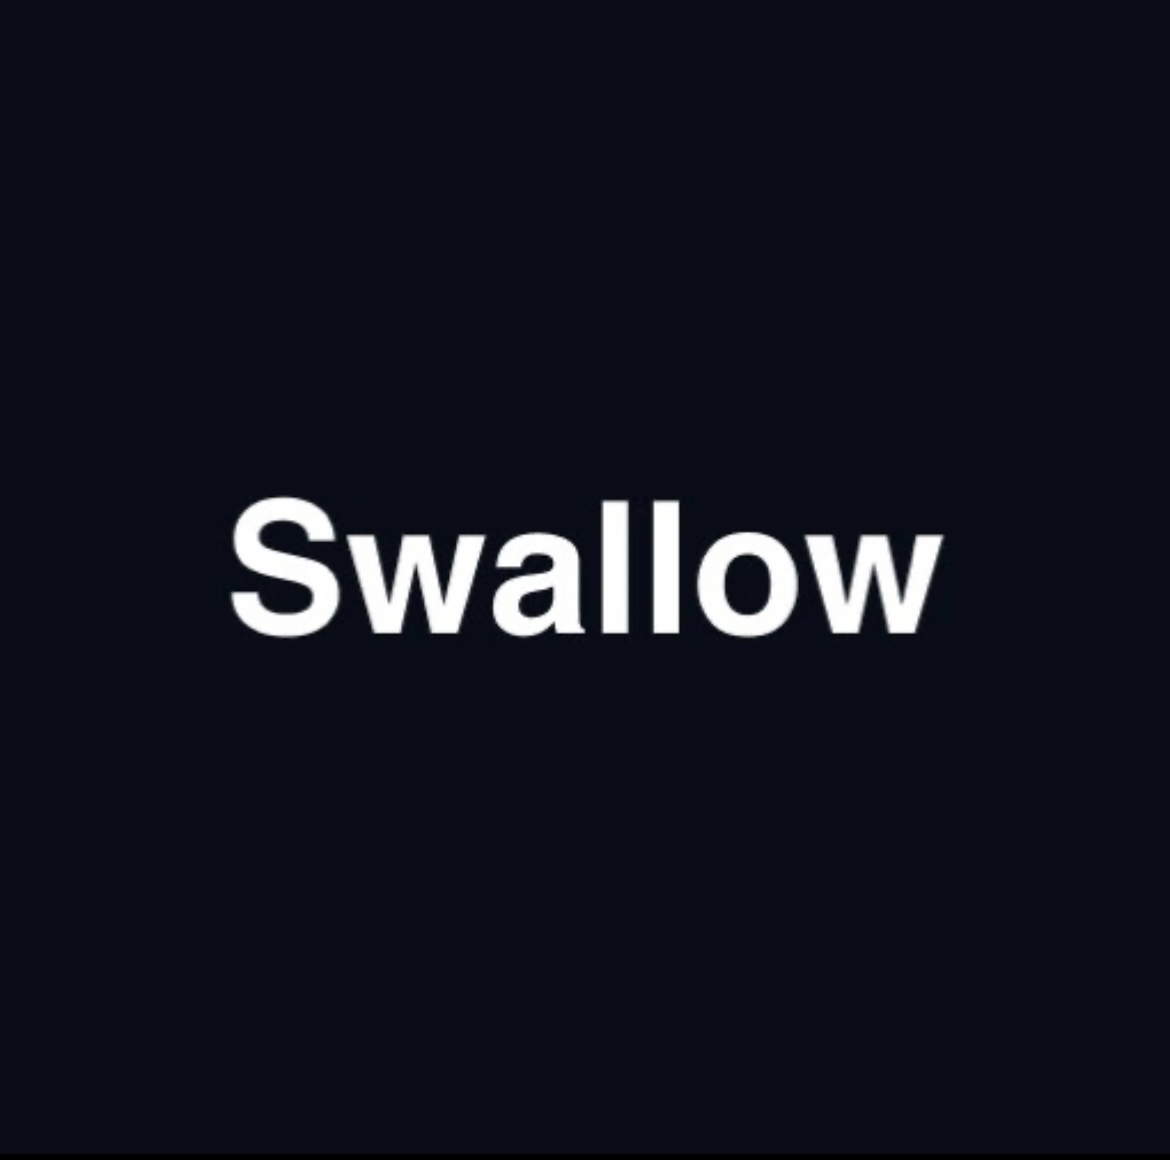 ﻿The Swalo Project: Simplifying Blockchain-Based Services for Users through Intuitive UI/UX